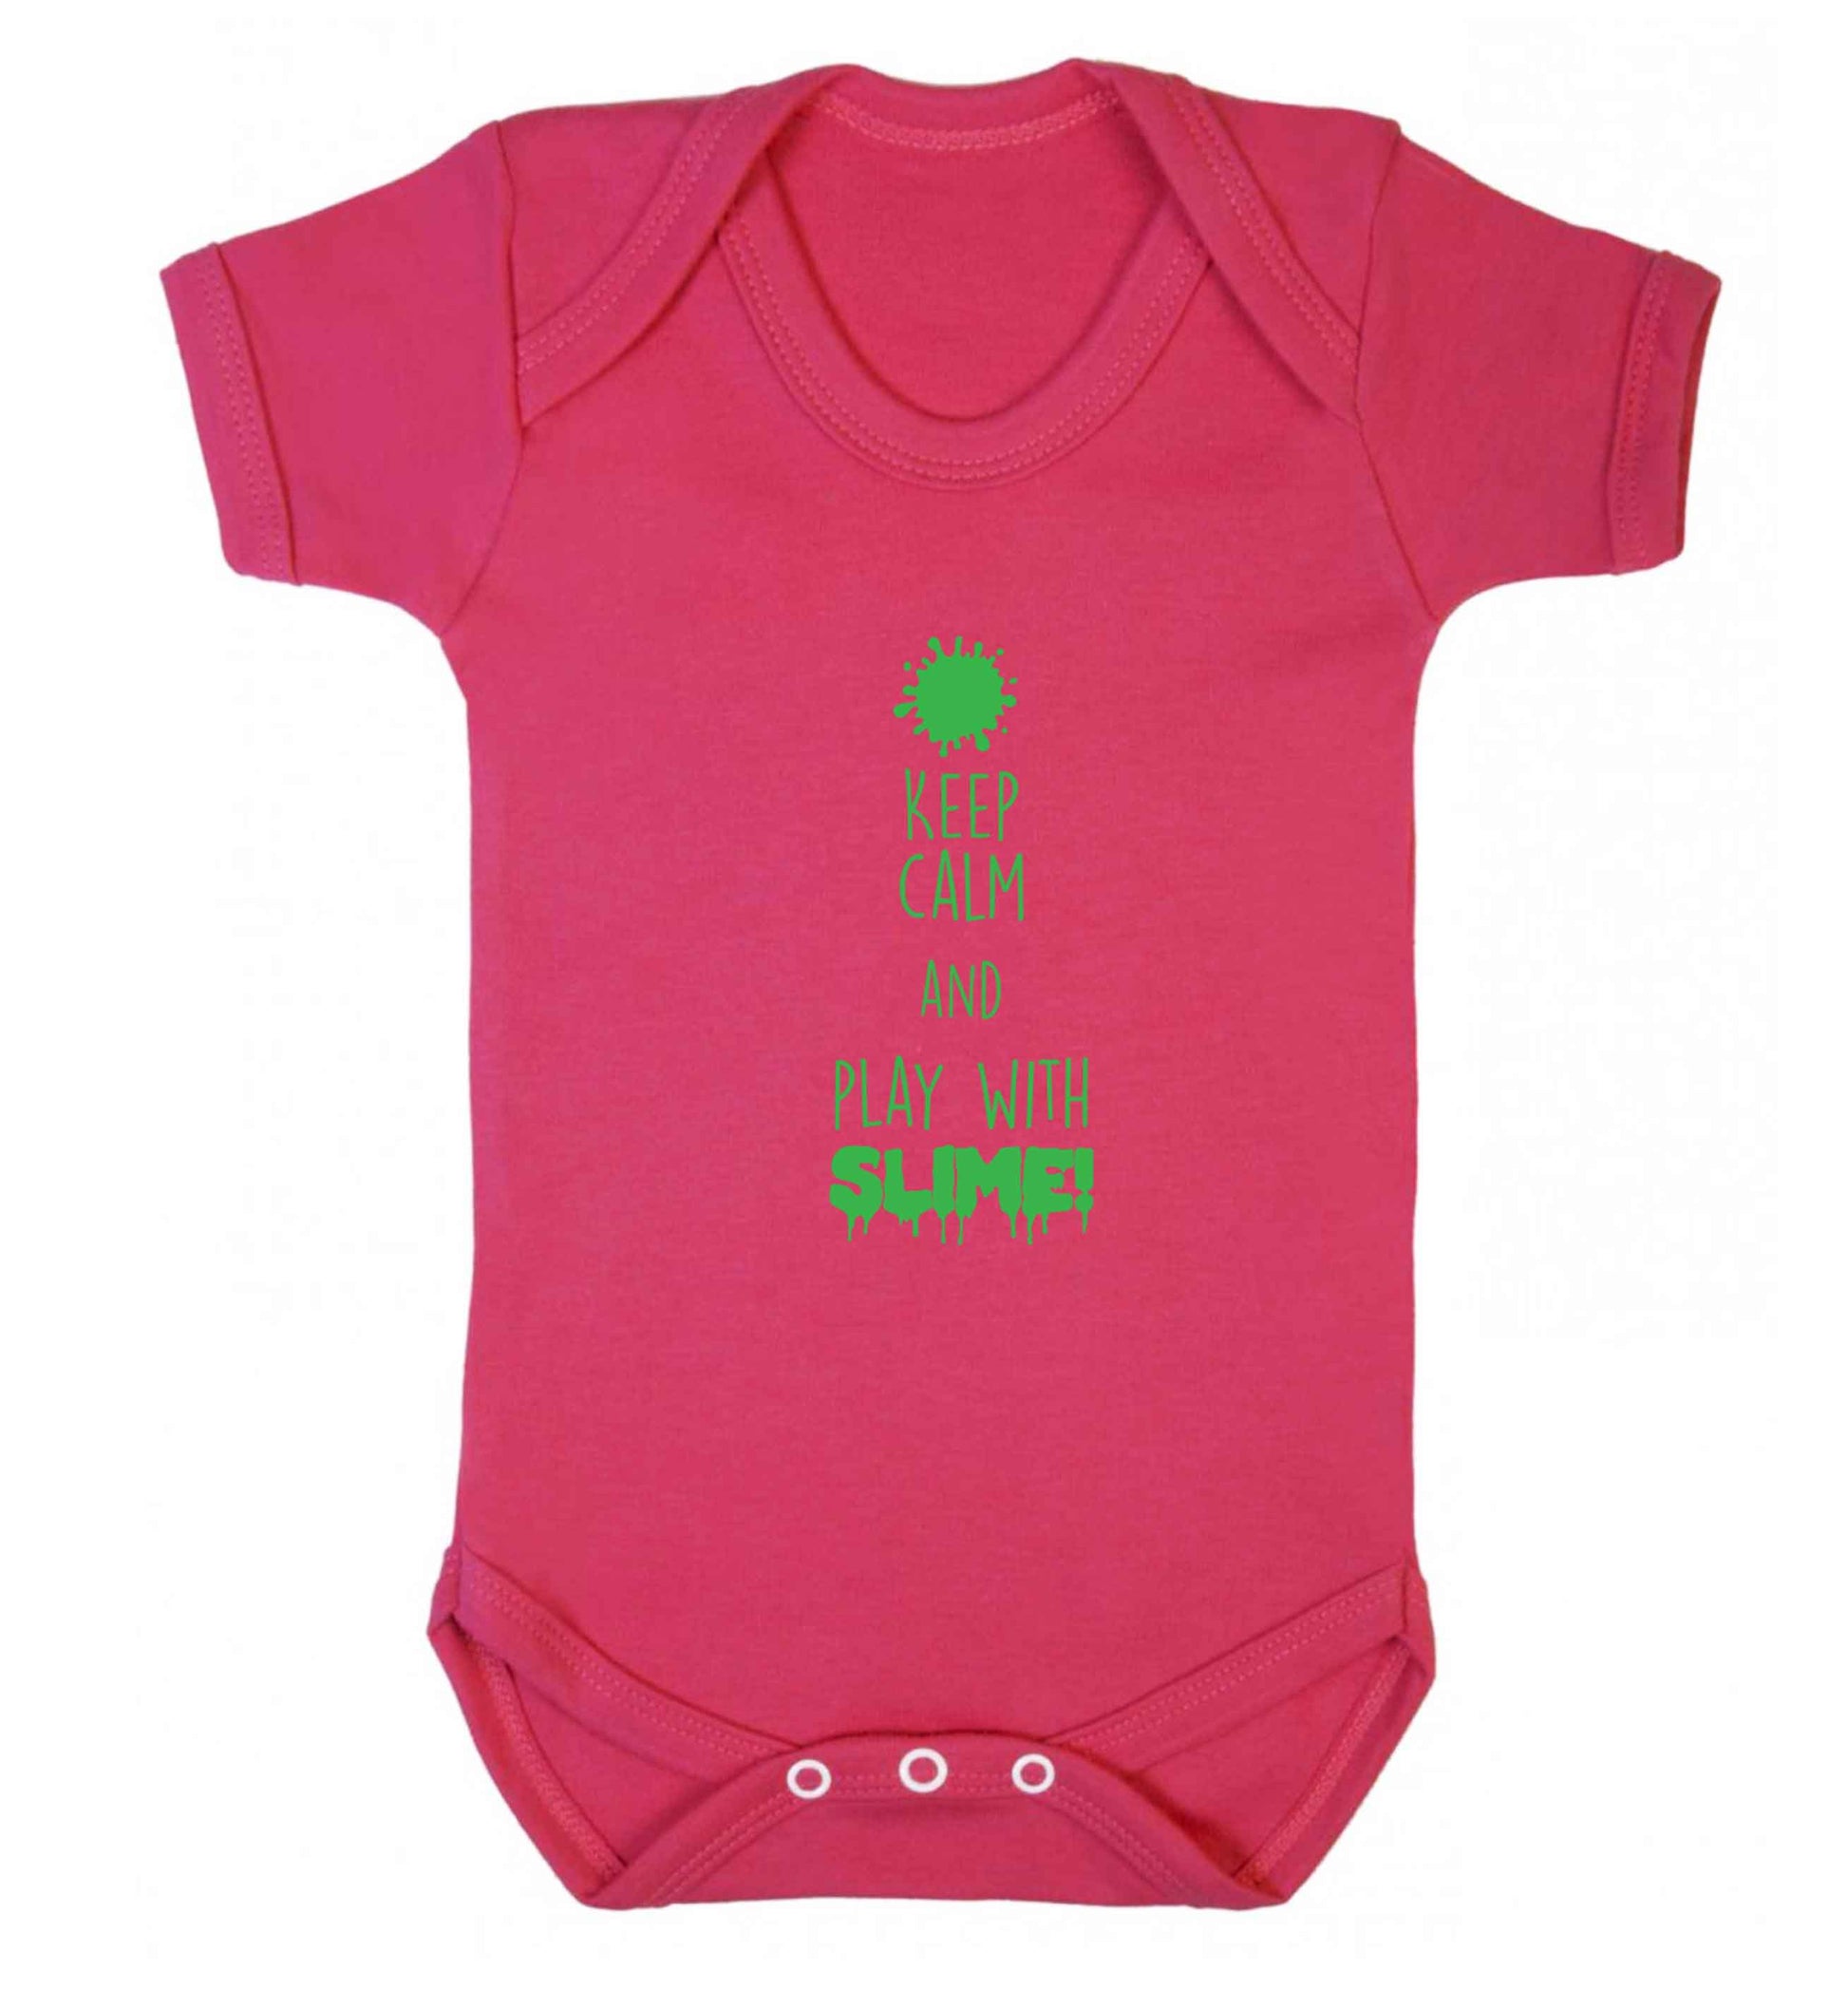 Neon green keep calm and play with slime!baby vest dark pink 18-24 months